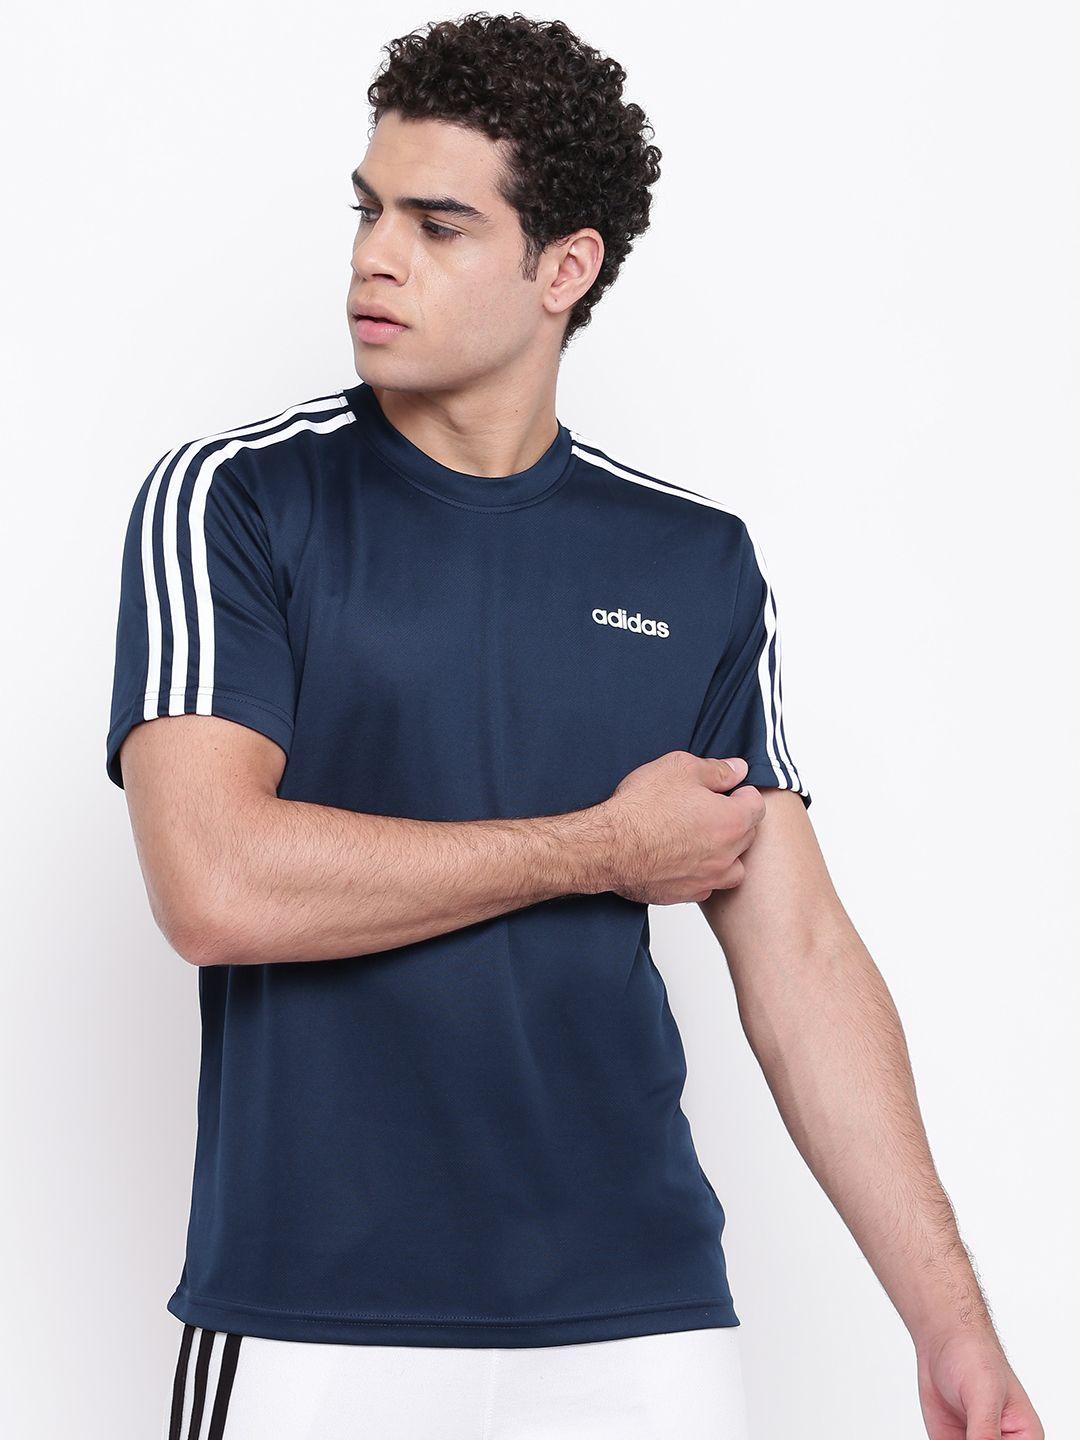 adidas men navy blue classic 3-stripes solid round neck sustainable t-shirt